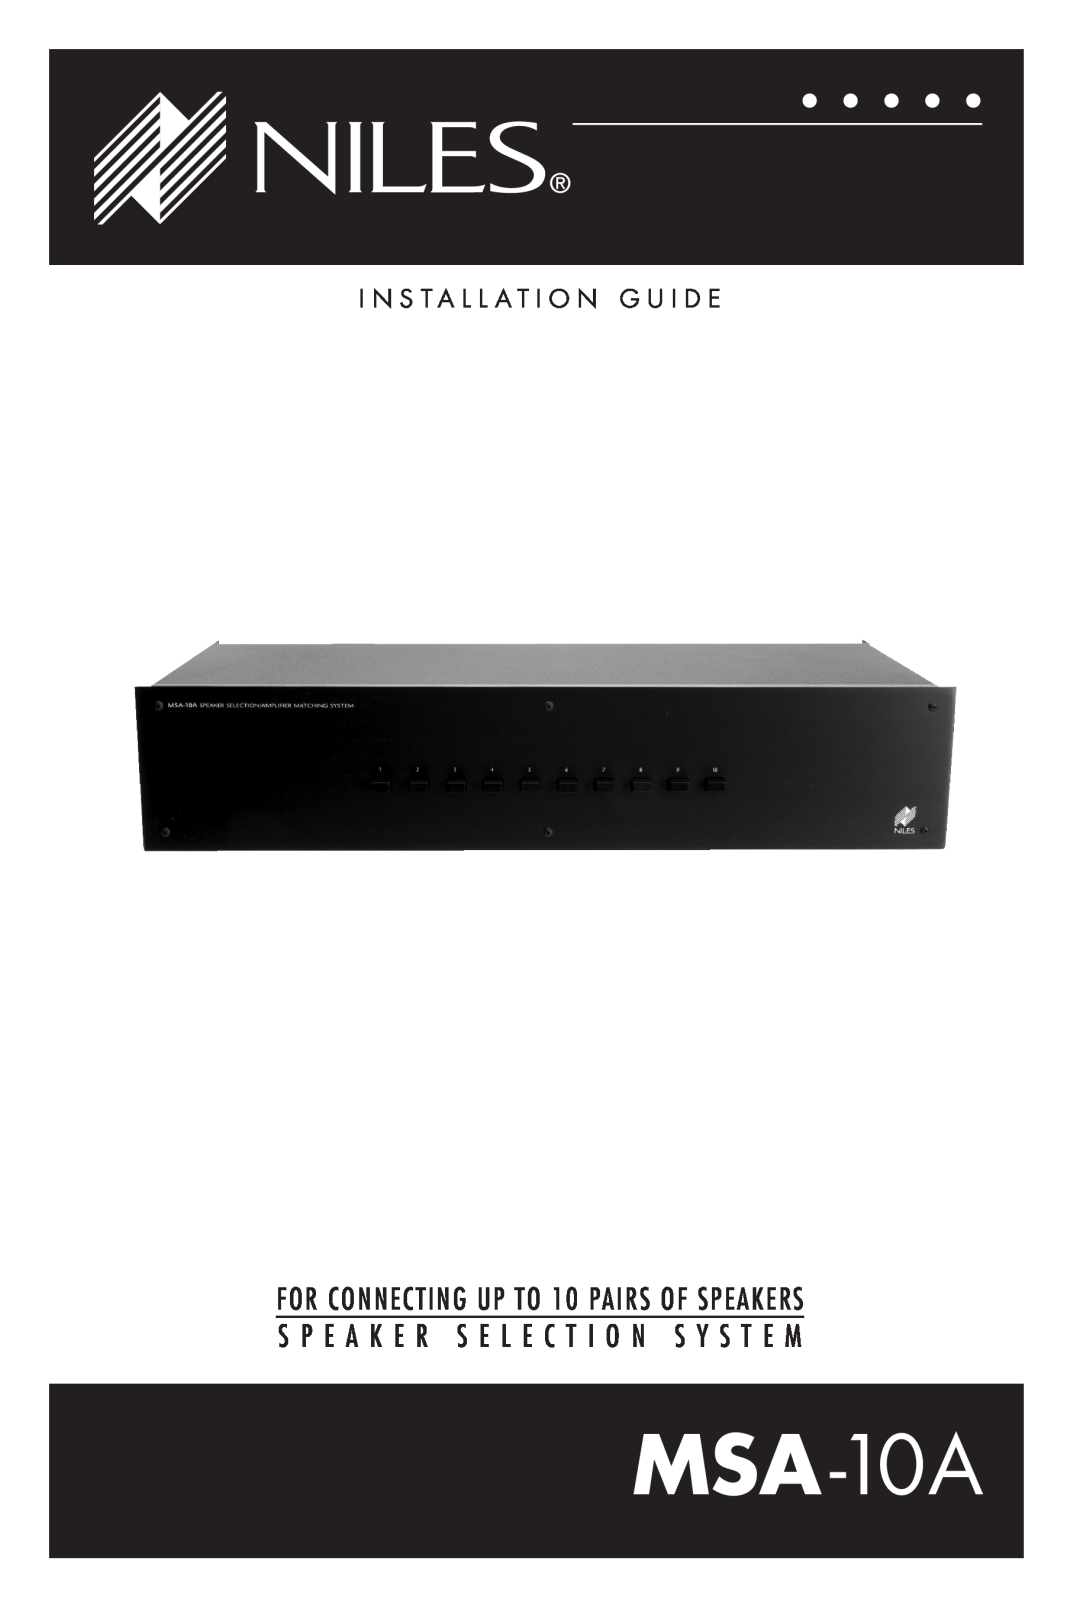 Niles Audio MSA-10A manual FOR CONNECTING UP TO 10 PAIRS OF SPEAKERS, S P E A K E R S E L E C T I O N S Y S T E M 